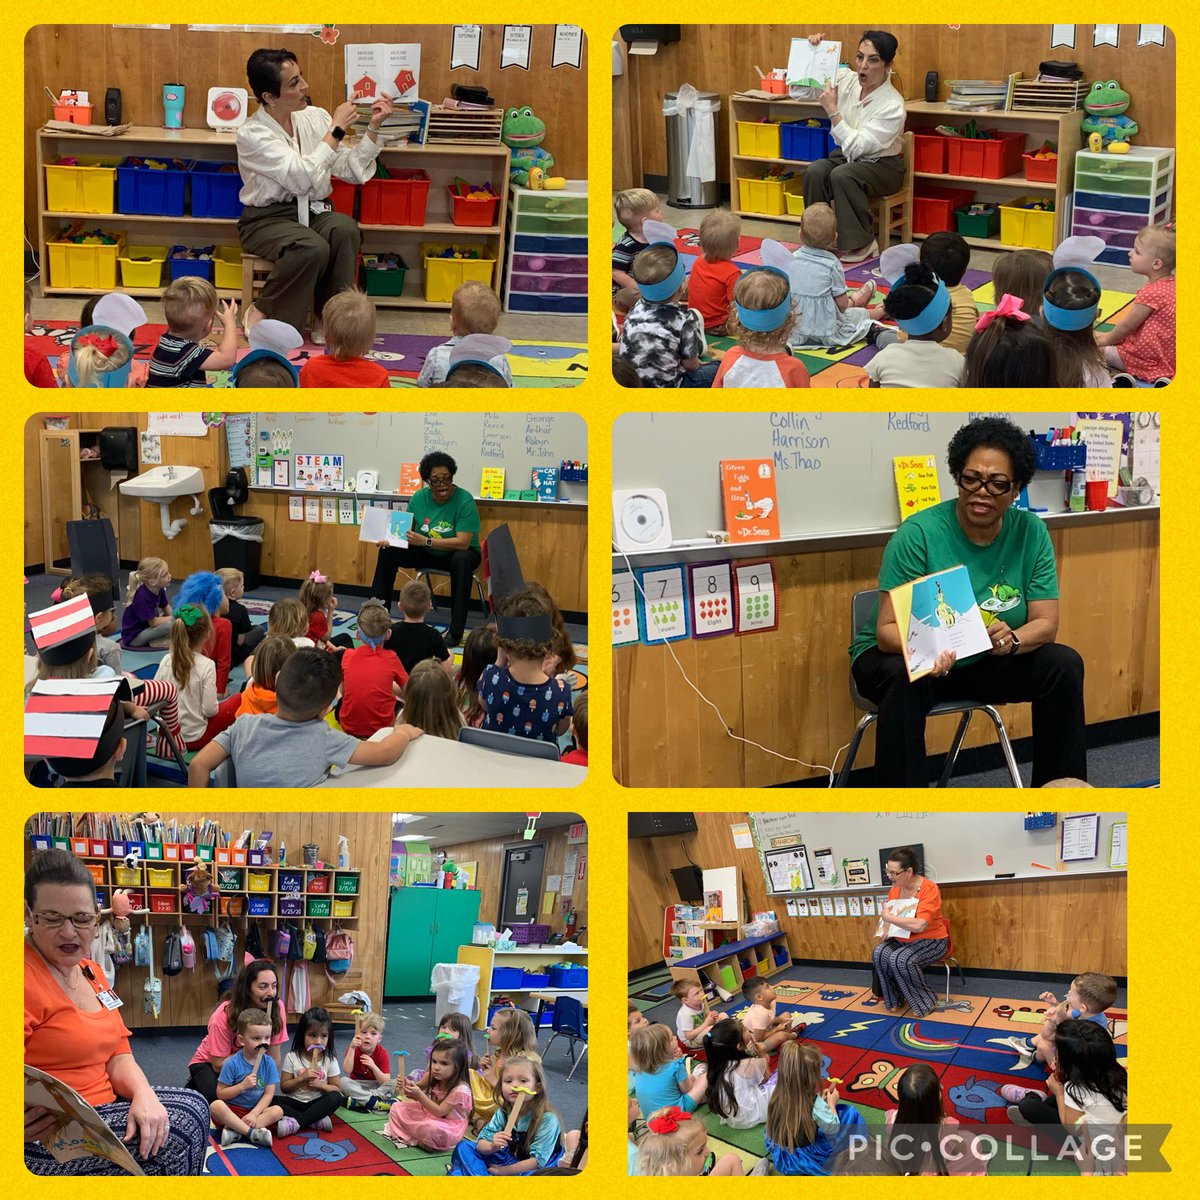 A huge heartfelt THANK YOU to all of the special readers that volunteered their time to come read to us this week! Thank you for helping our kiddos grow their love of reading. Dr.LindaMacias @cfisdleslie @CFISDNydia @MGarza_CFISD @terryortiz01 @DawnTryon11 @CFISDBambi